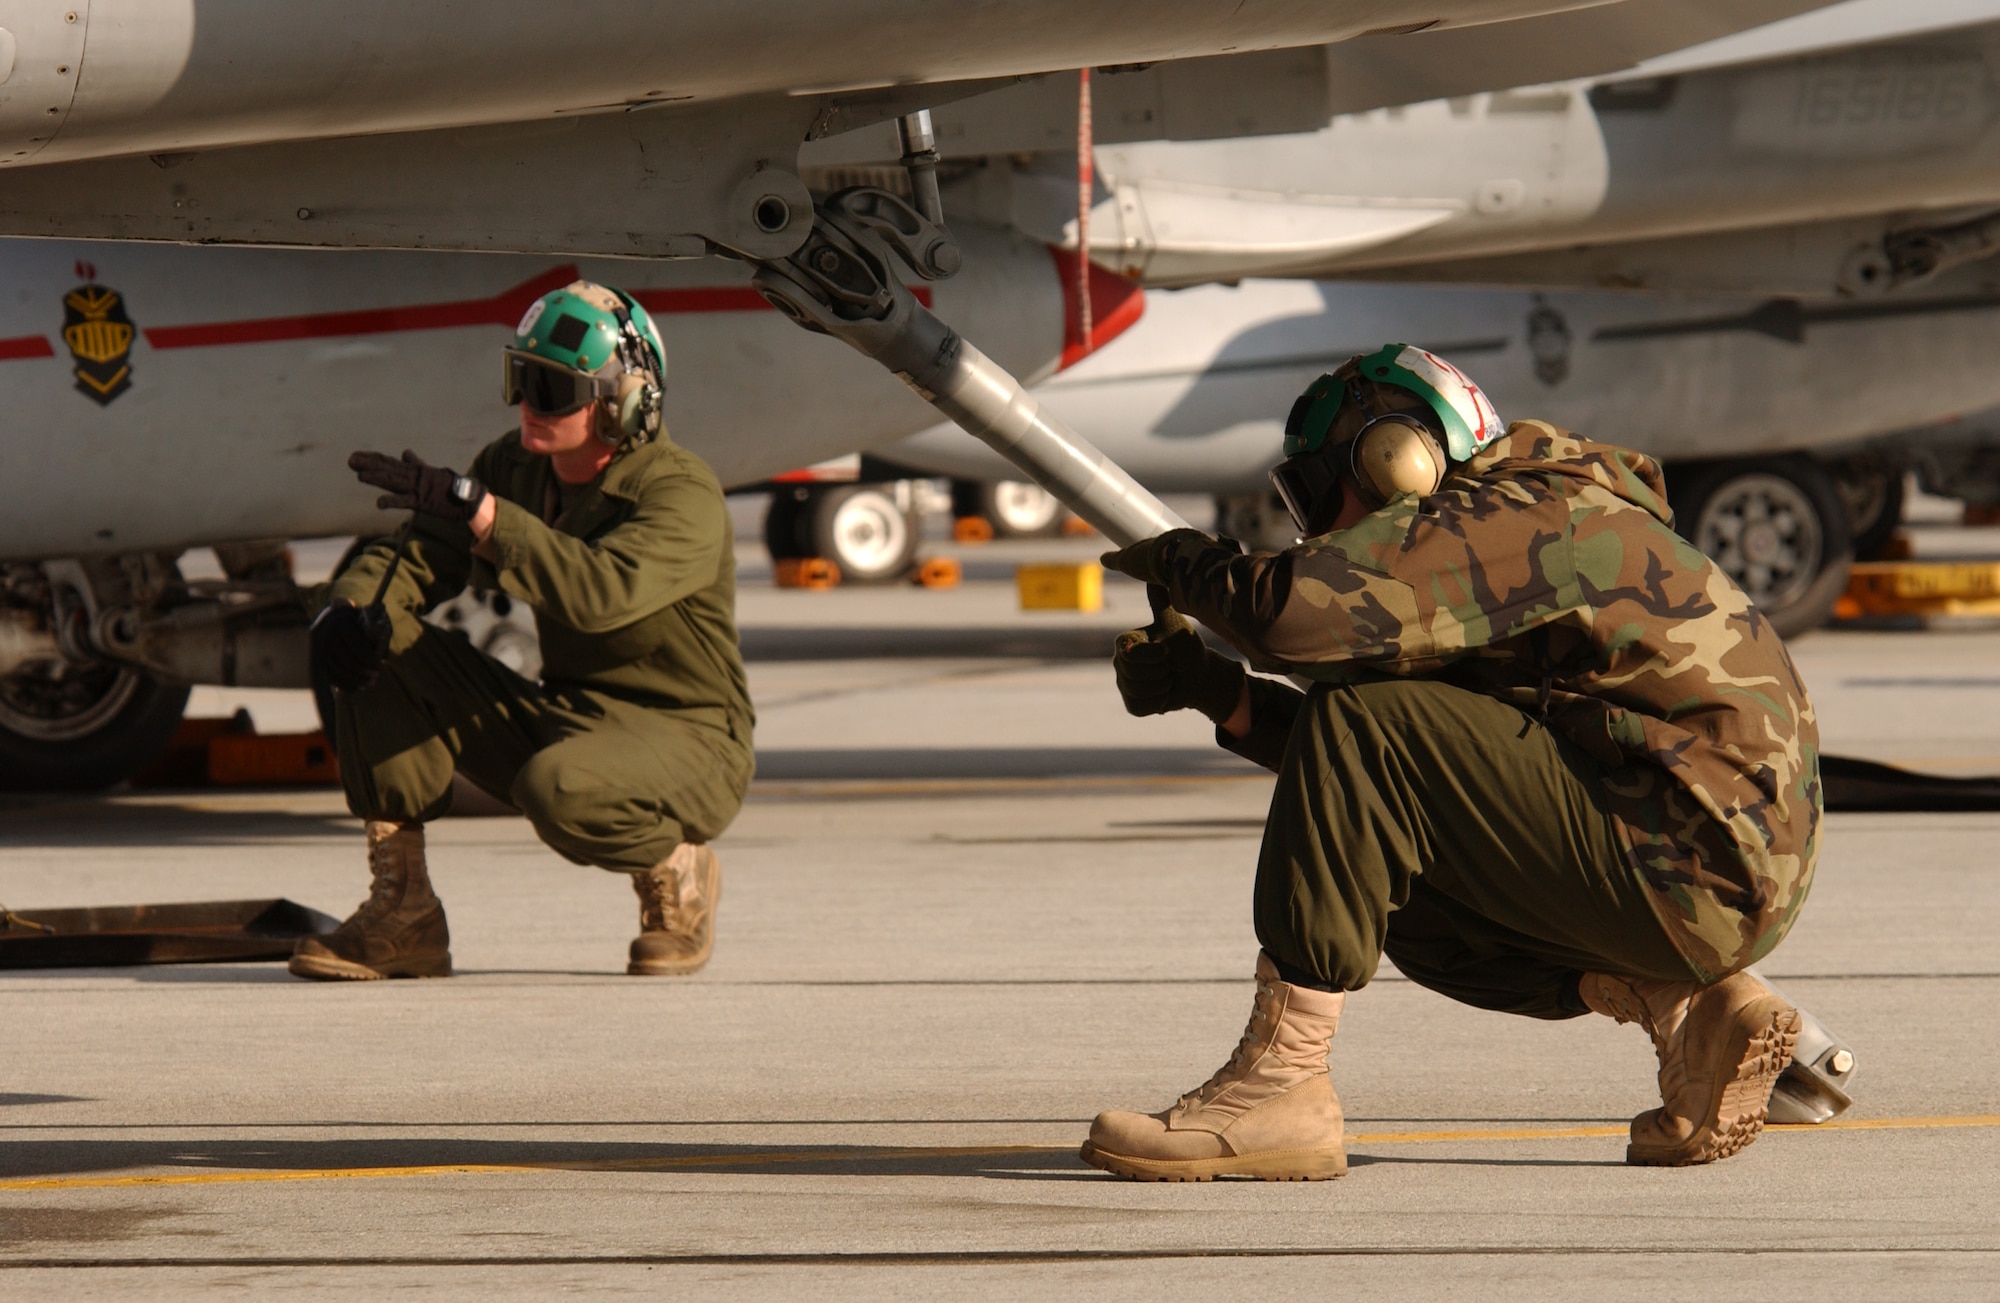 Two Marines from the 1st Marine Aircraft Wing in Okinawa use hand signals during an F/A-18 Hornet launch at Eielson Air Force Base, Alaska, on Tuesday, June 6, 2006, during exercise Northern Edge 2006. The joint training exercise hosted by Alaskan Command is one of a series of U.S. Pacific Command exercises that prepare joint forces to respond to crises in the Asian Pacific region. (U.S. Air Force photo/Staff Sgt. Joshua Strang)